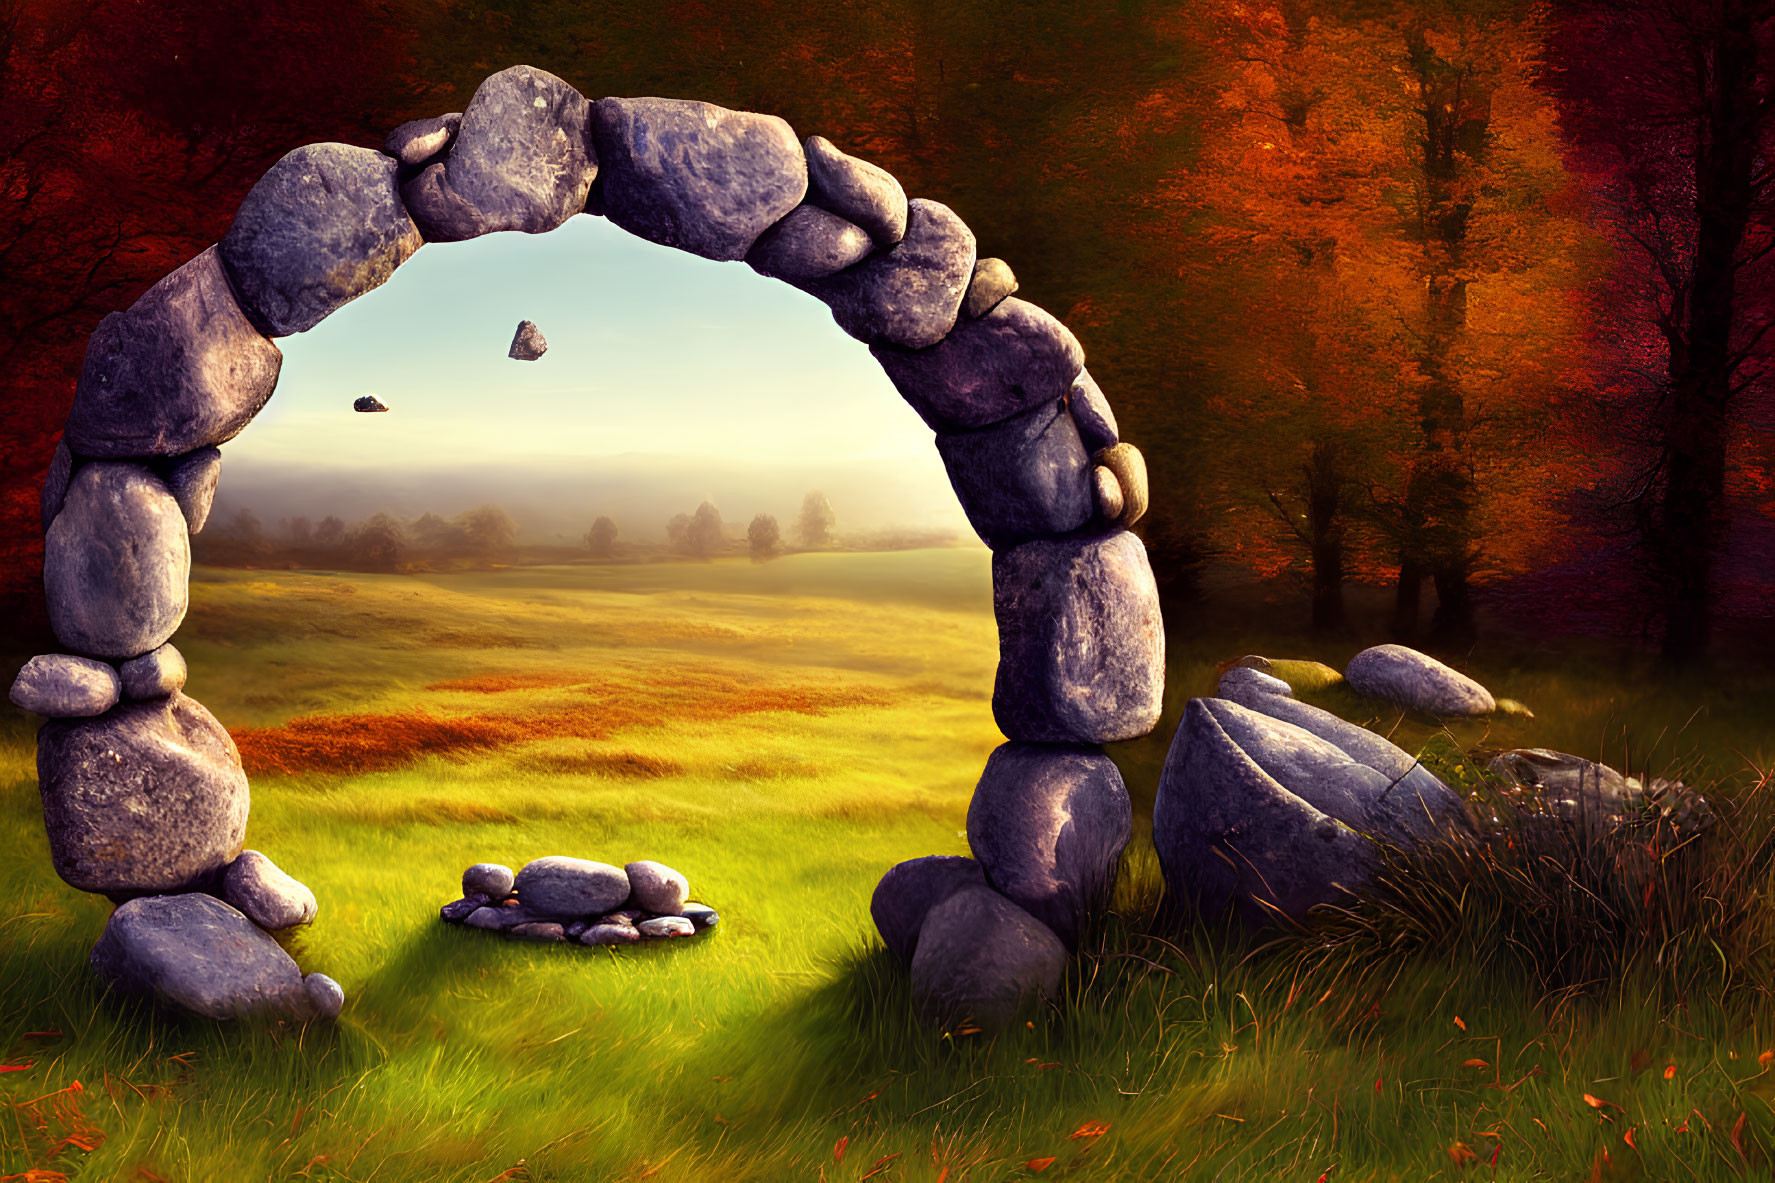 Stone archway in vibrant autumn landscape with serene field and colorful trees